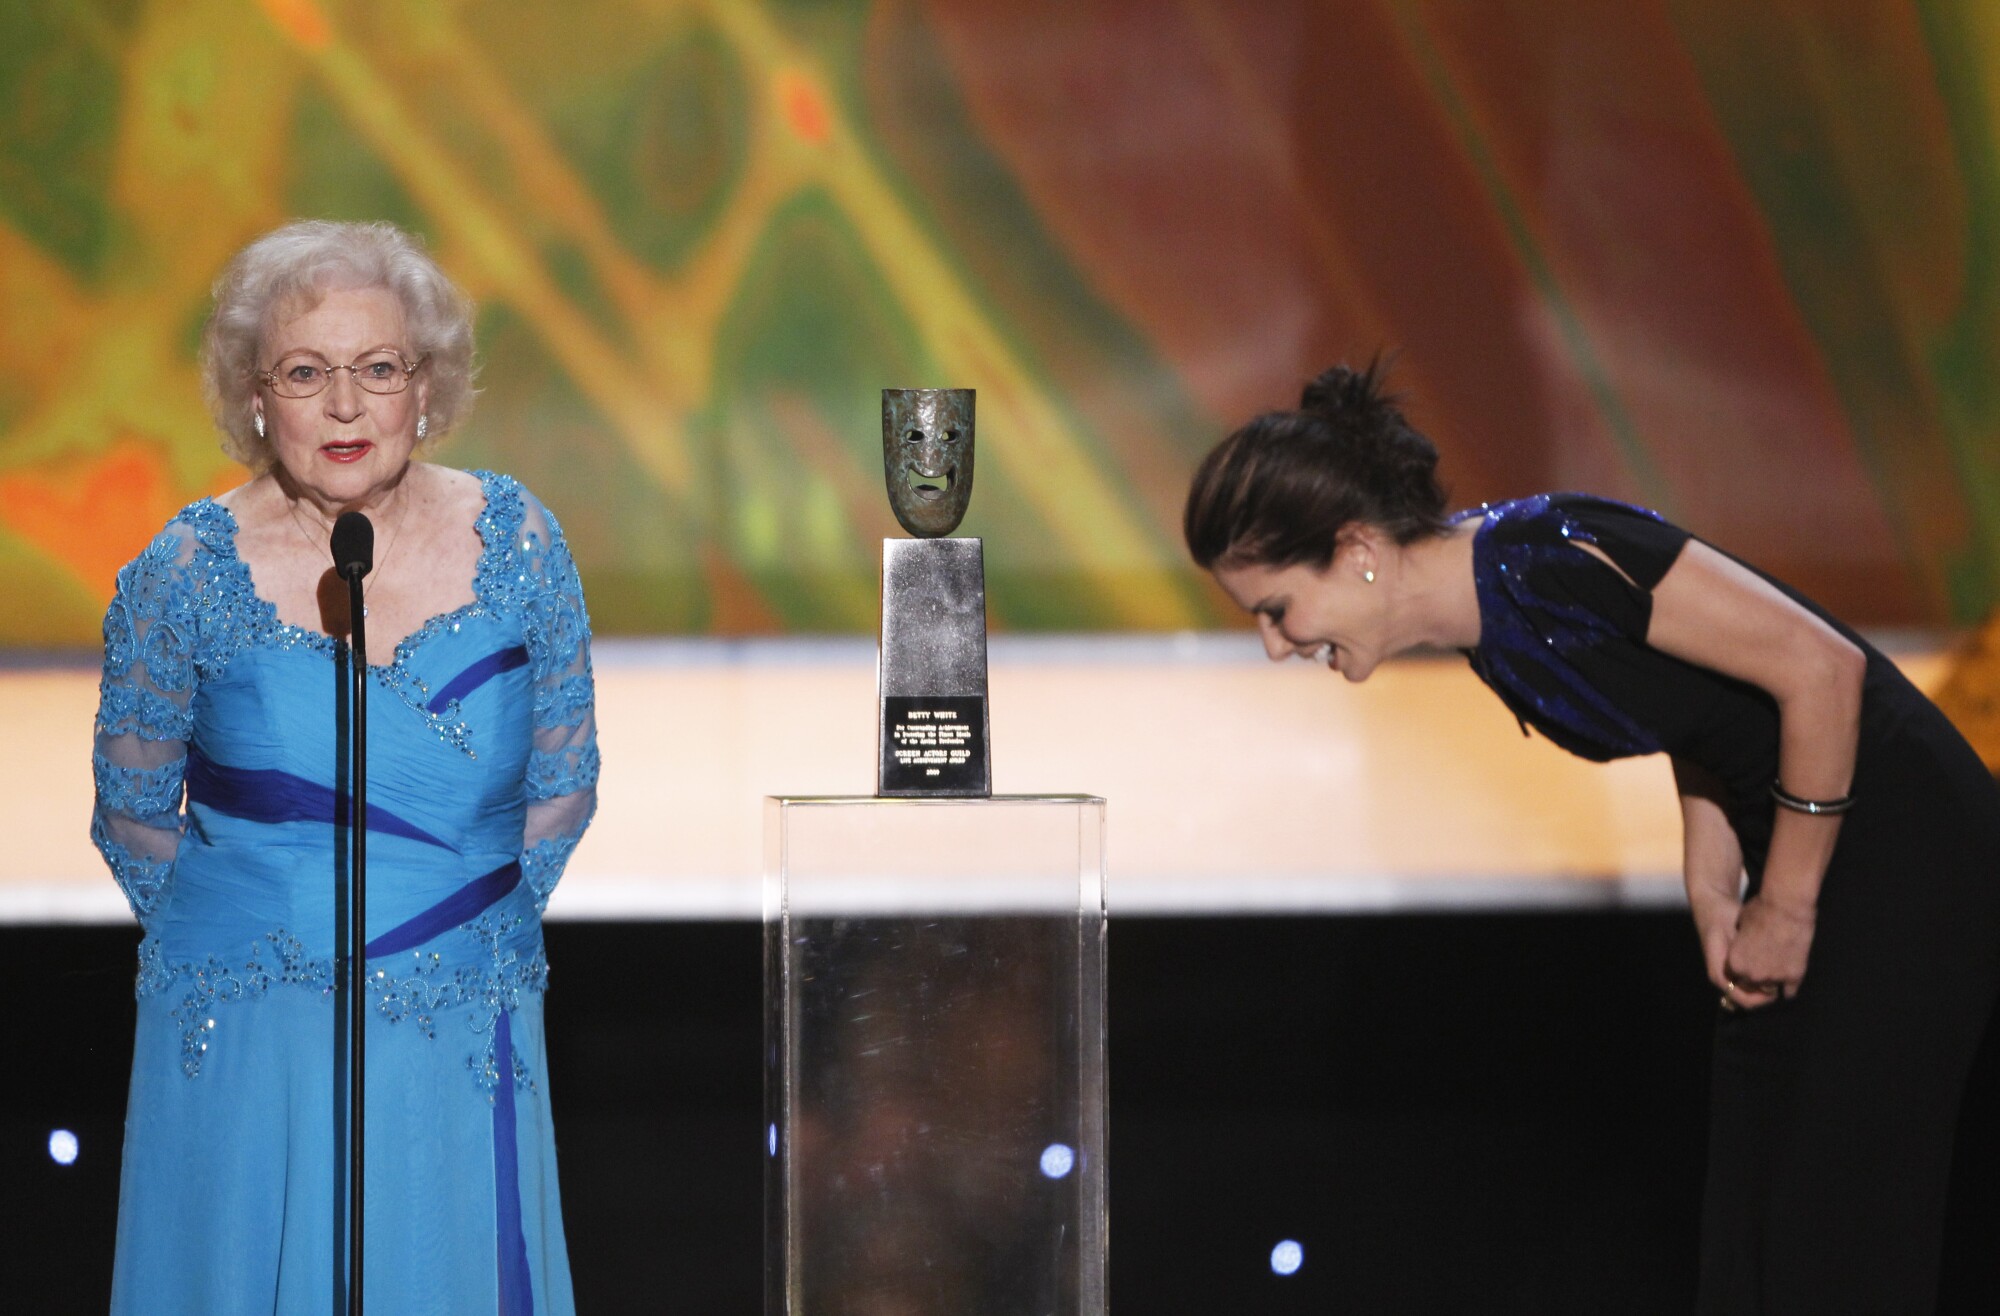 Betty White, left, accepts the Life Achievement Award from Sandra Bullock at the 16th Screen Actors Guild Awards.